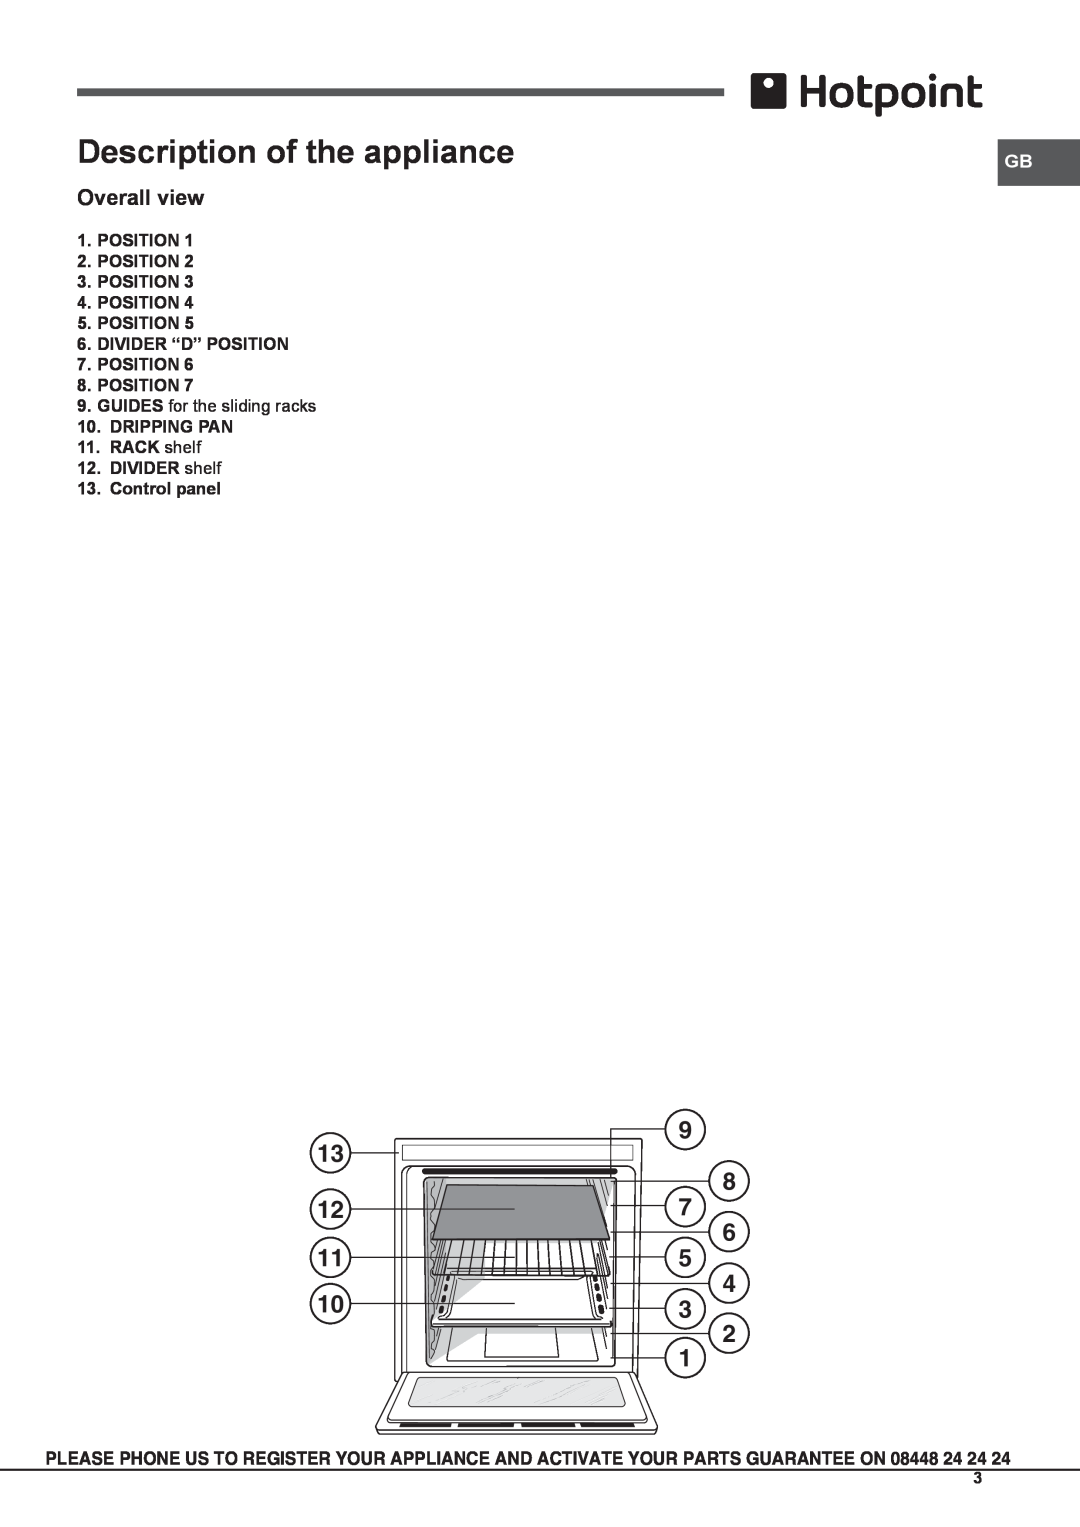 Hotpoint OS 897D P /HP S Description of the appliance, 9 8 7 6 5, Overall view, POSITION 2.POSITION 3.POSITION 4.POSITION 